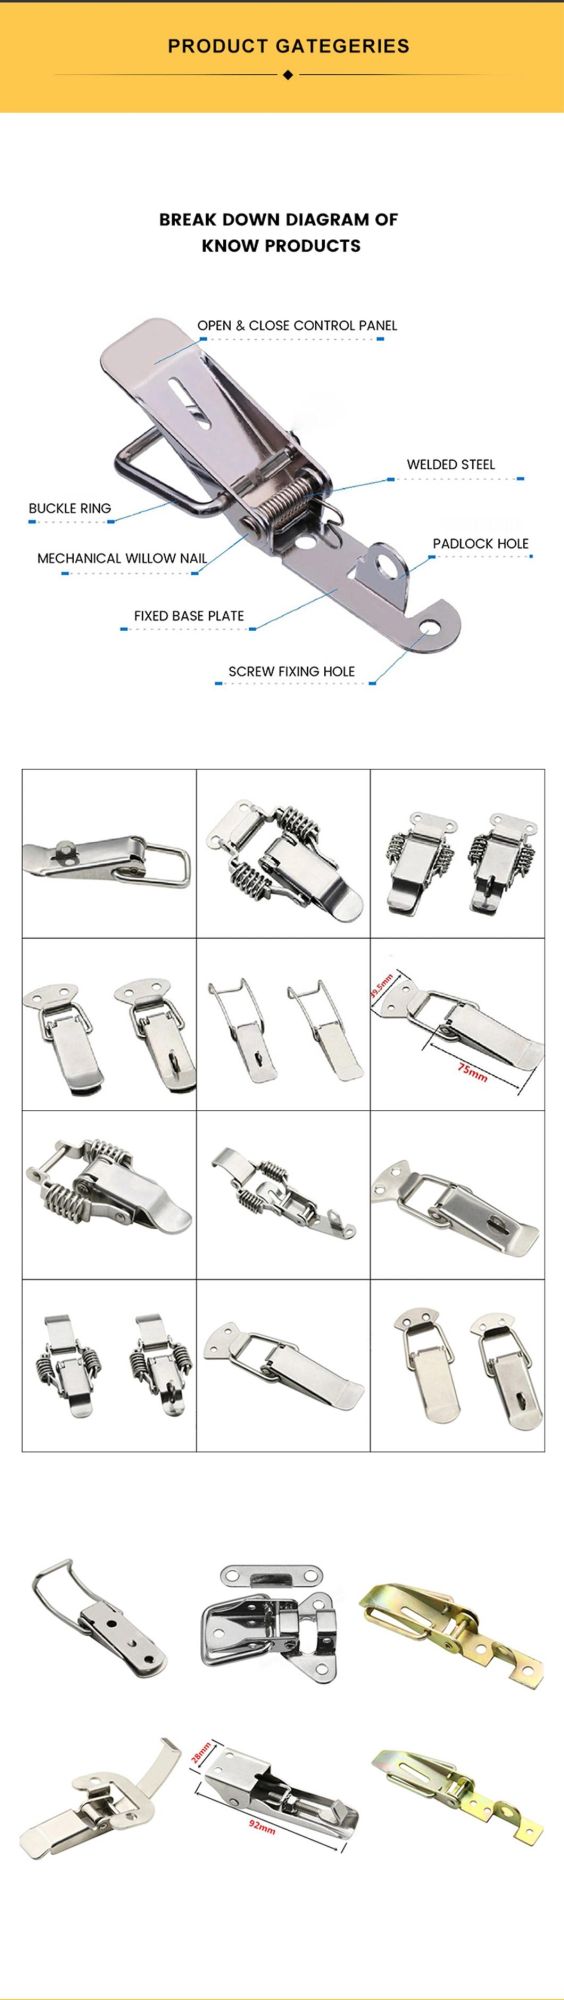 Toggle Sideboard Latch Catch System Heavy Duty Large Stainless Toggle Latch Large Butterfly Mini Draw Latch Rotary Draw Latches